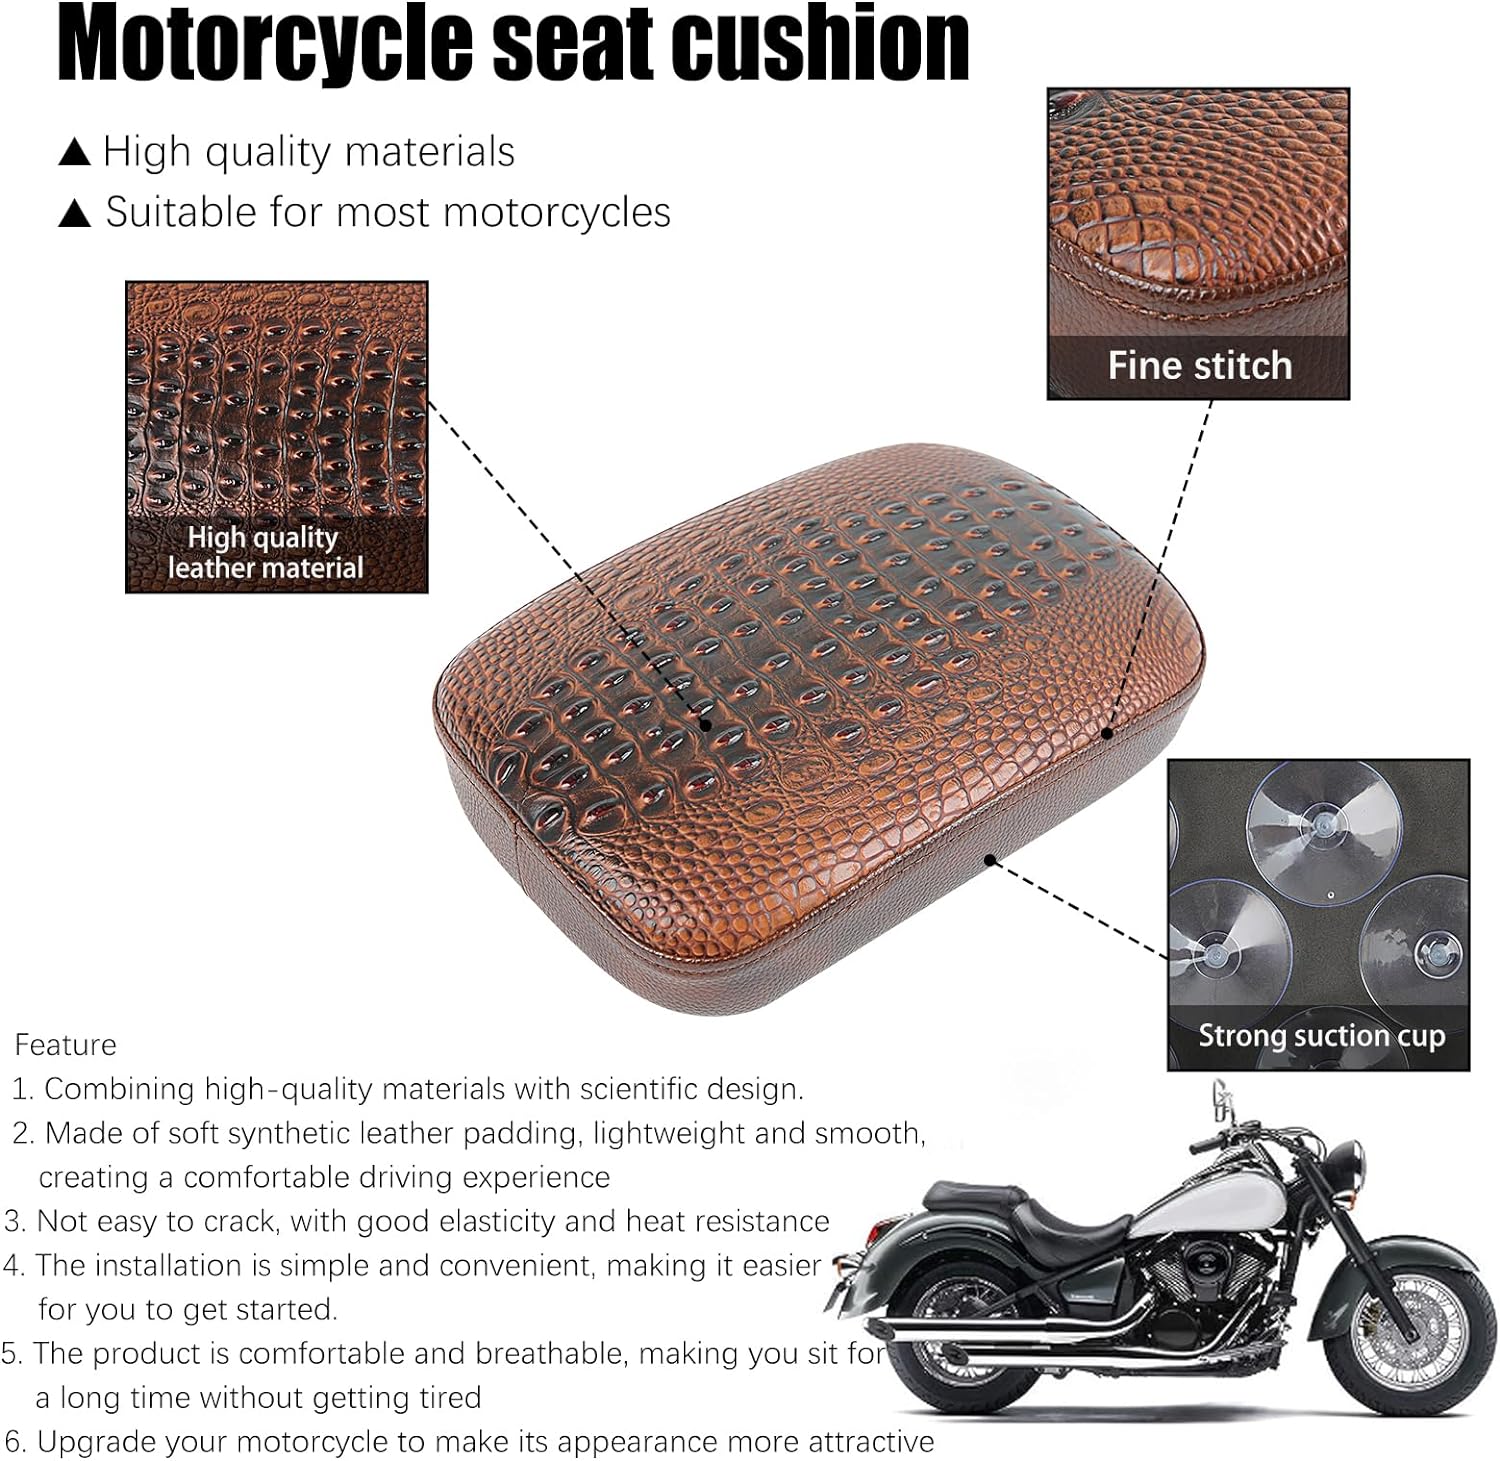 DREAMIZER Universal Black Pillion Passenger Pad Seat Motorcycle Solo Seat Rear Cushion 8 Suction Cups Compatible with Harley Davidson Sportster XL 883 1200 Forty Eight Dyna Chopper Bobber Custom - DREAMIZER Seat Review